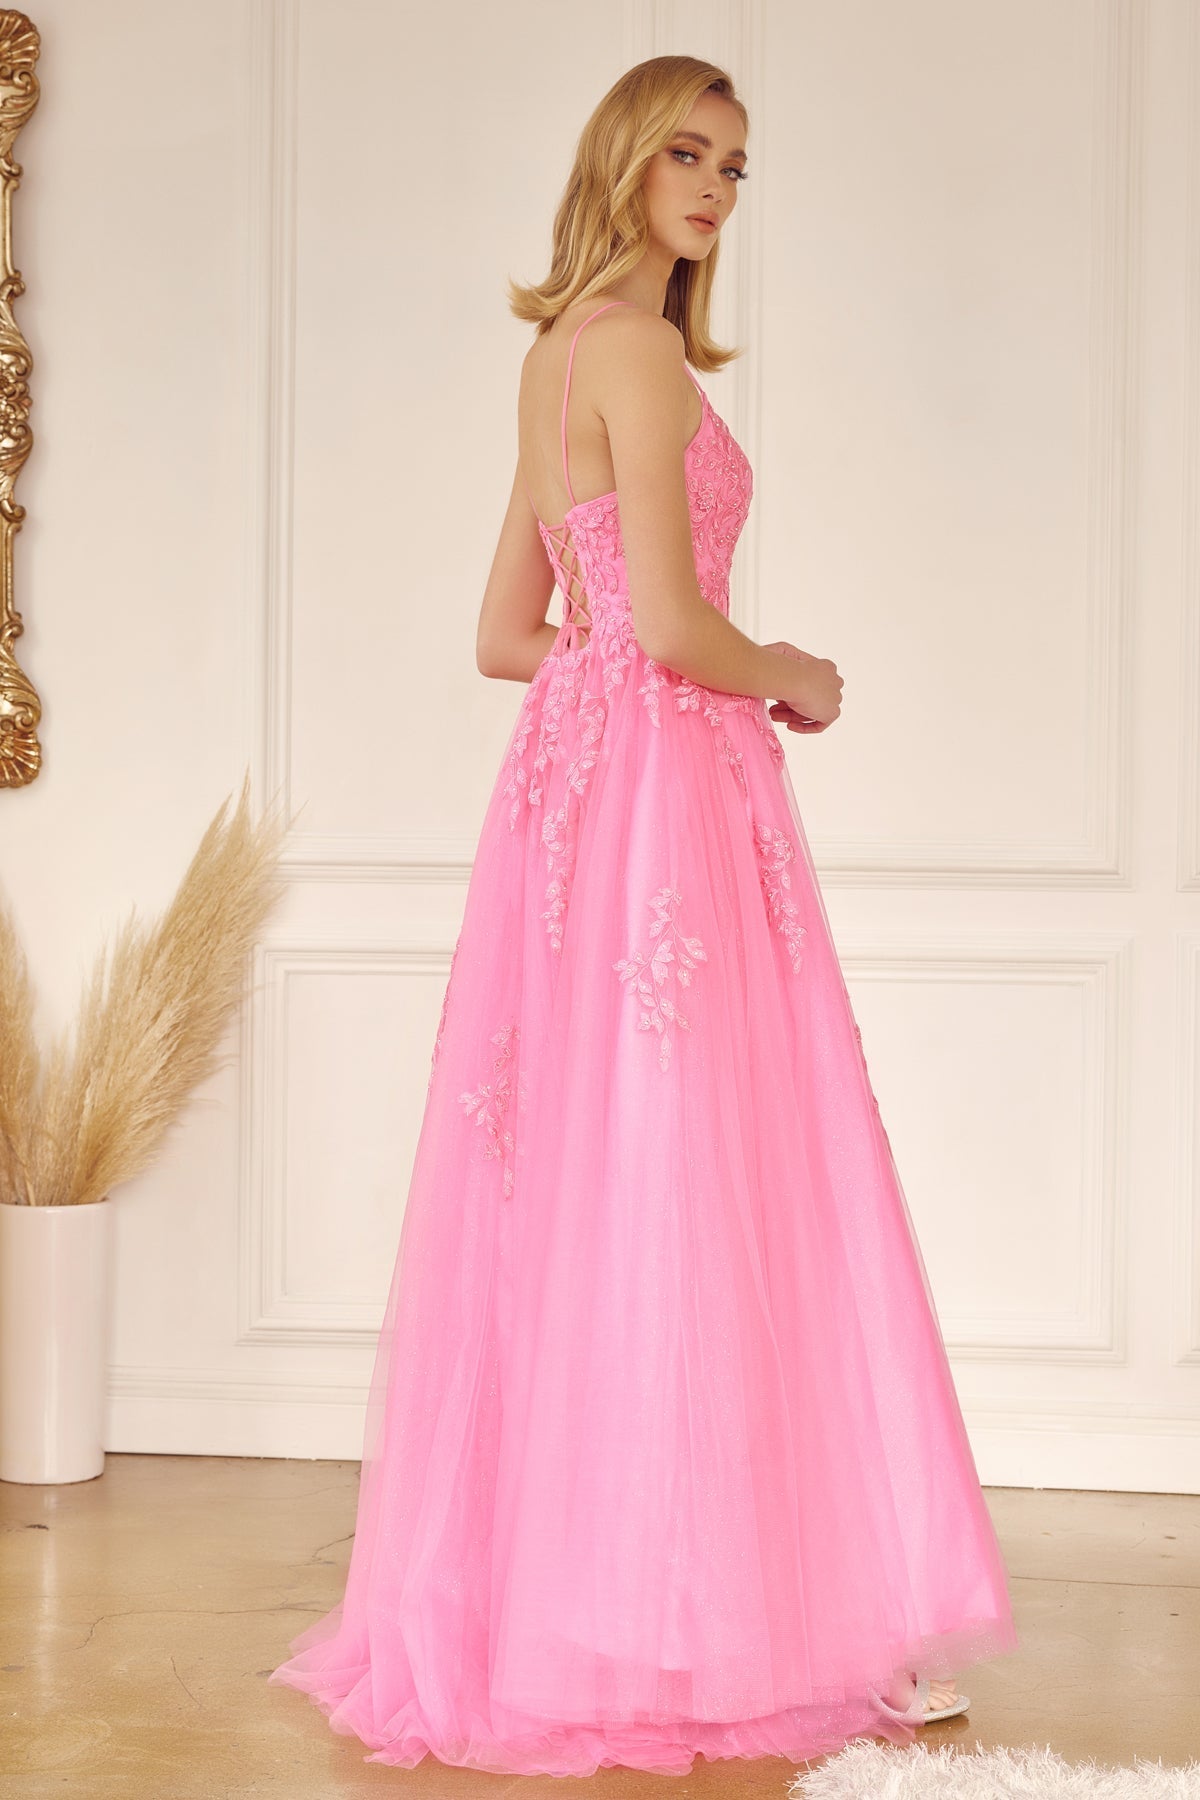 Straight Across Floral Applique Tulle Long Prom Dress JT260 Elsy Style Prom Dress